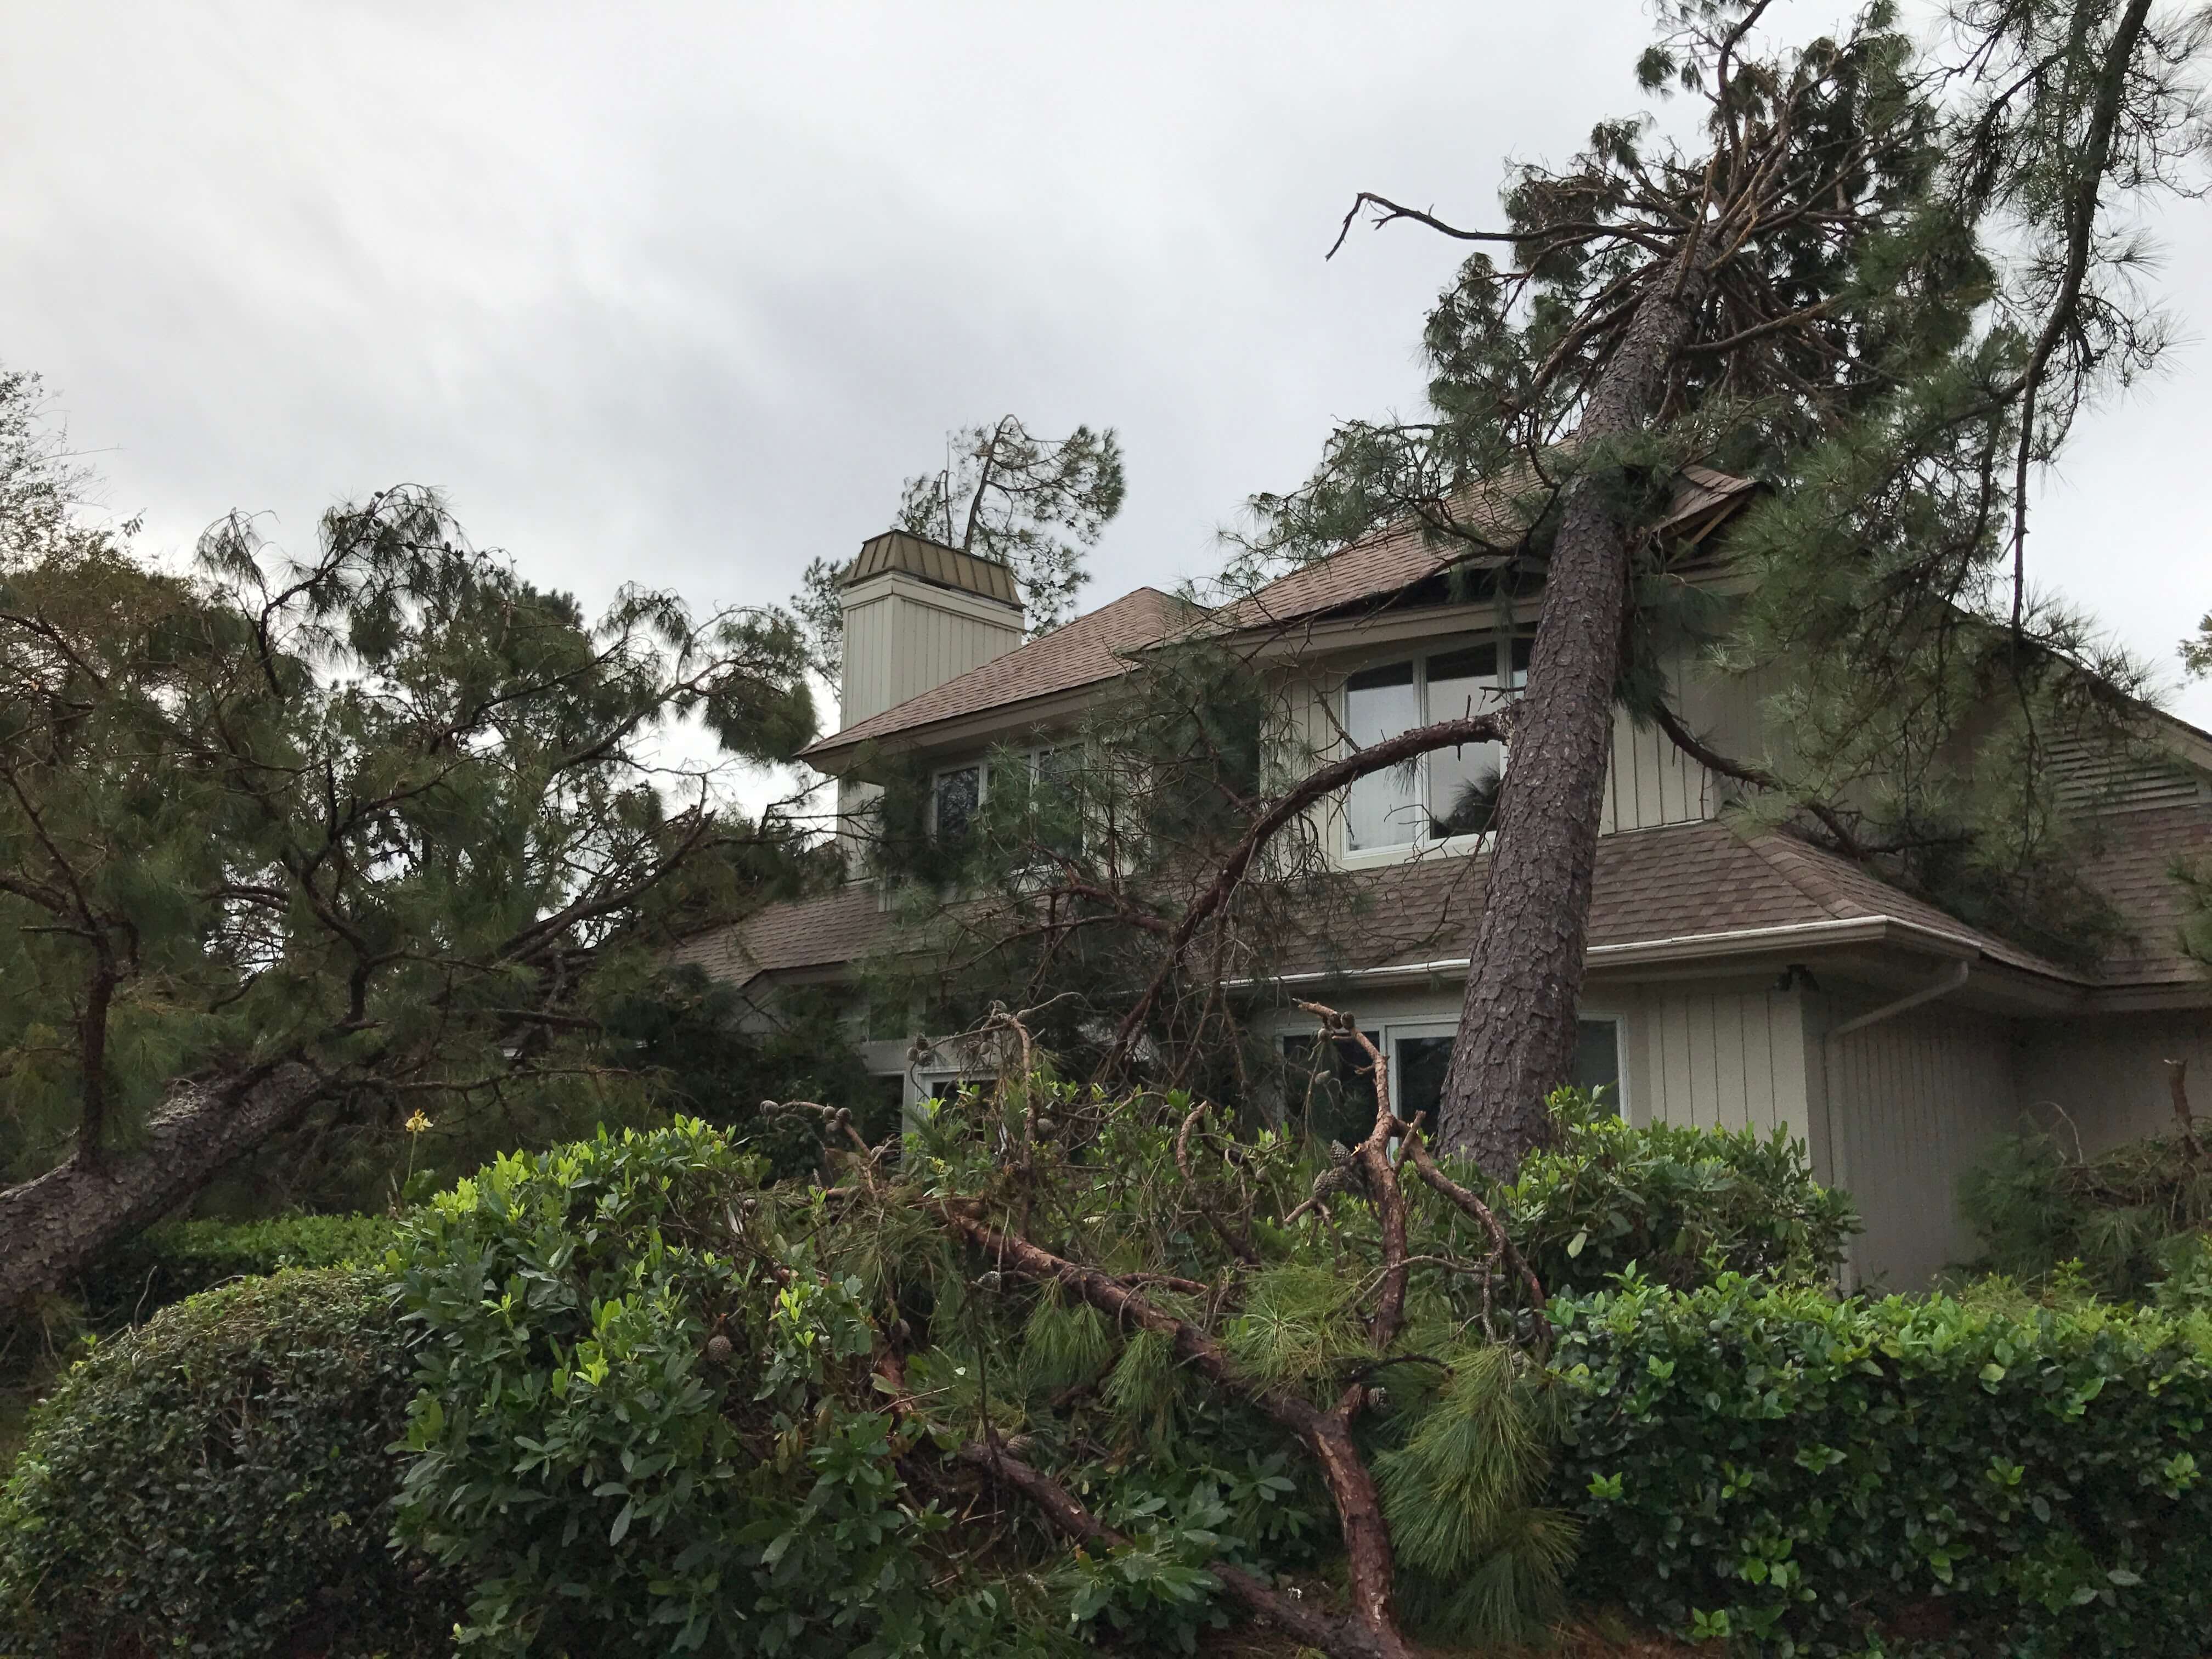 How Can I Tell If My Roof Has Storm Damage?